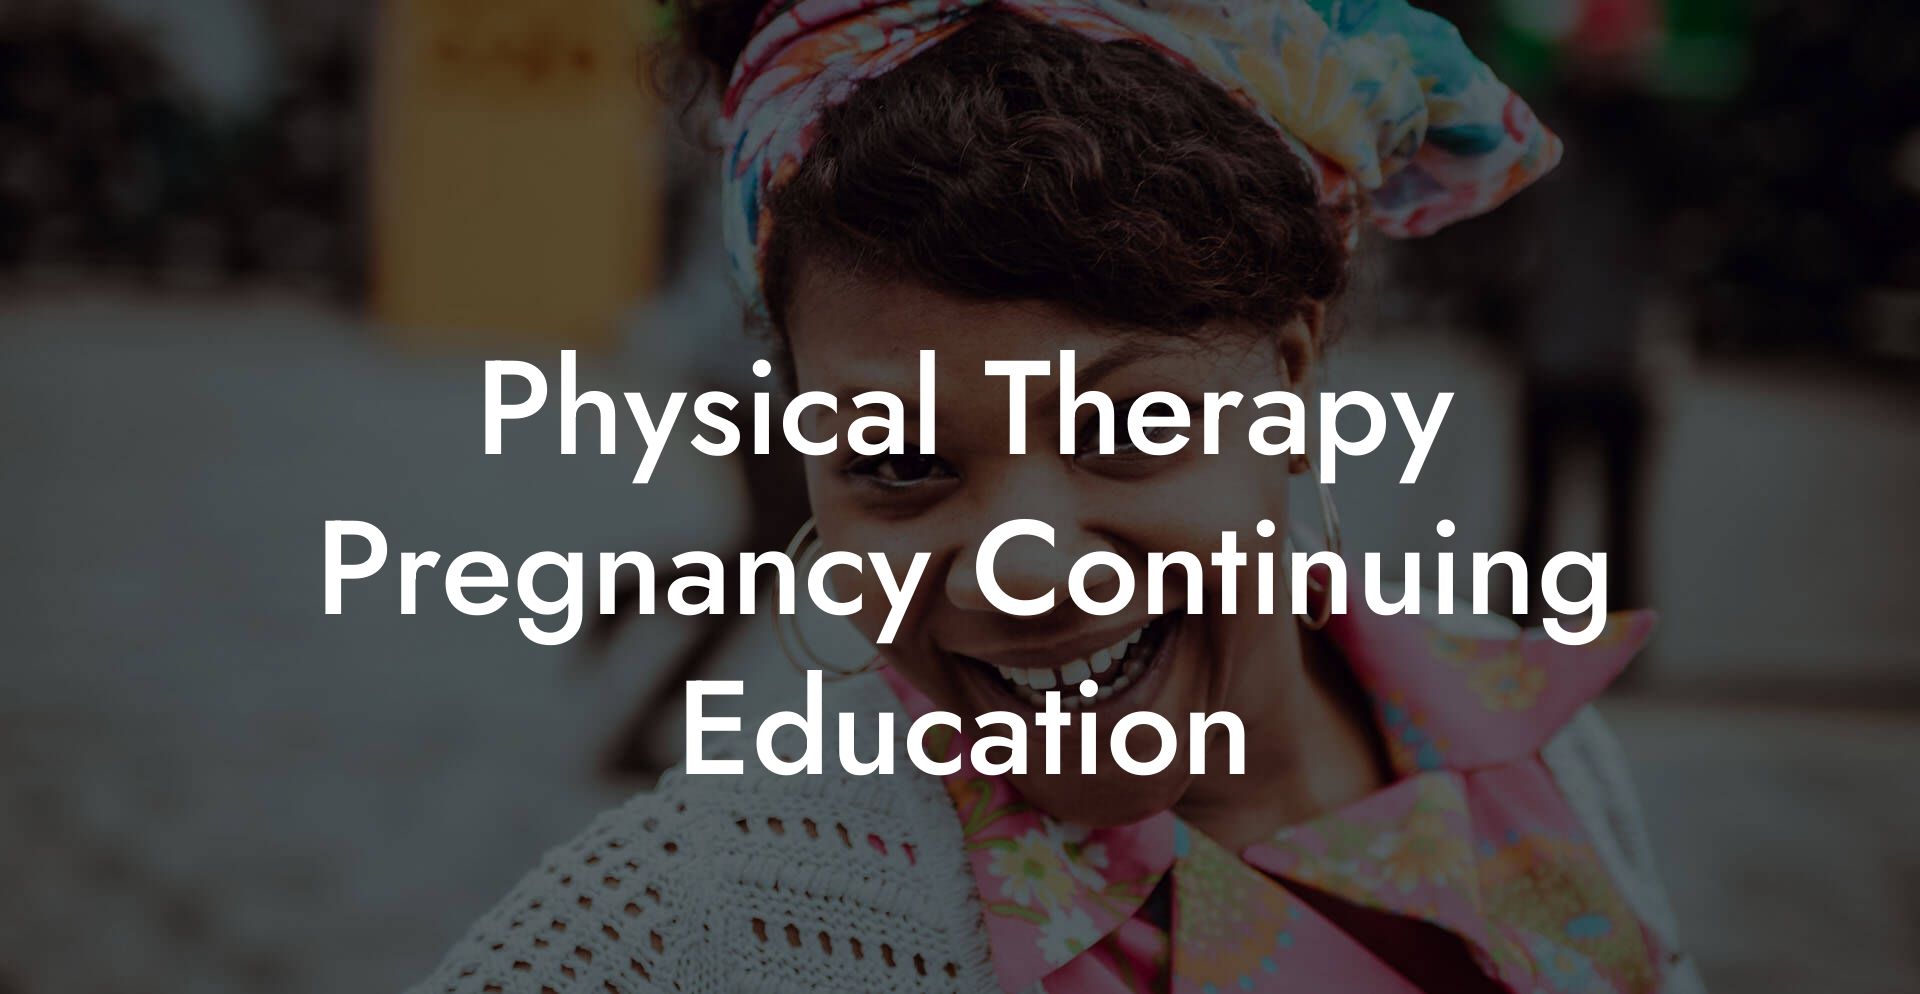 Physical Therapy Pregnancy Continuing Education